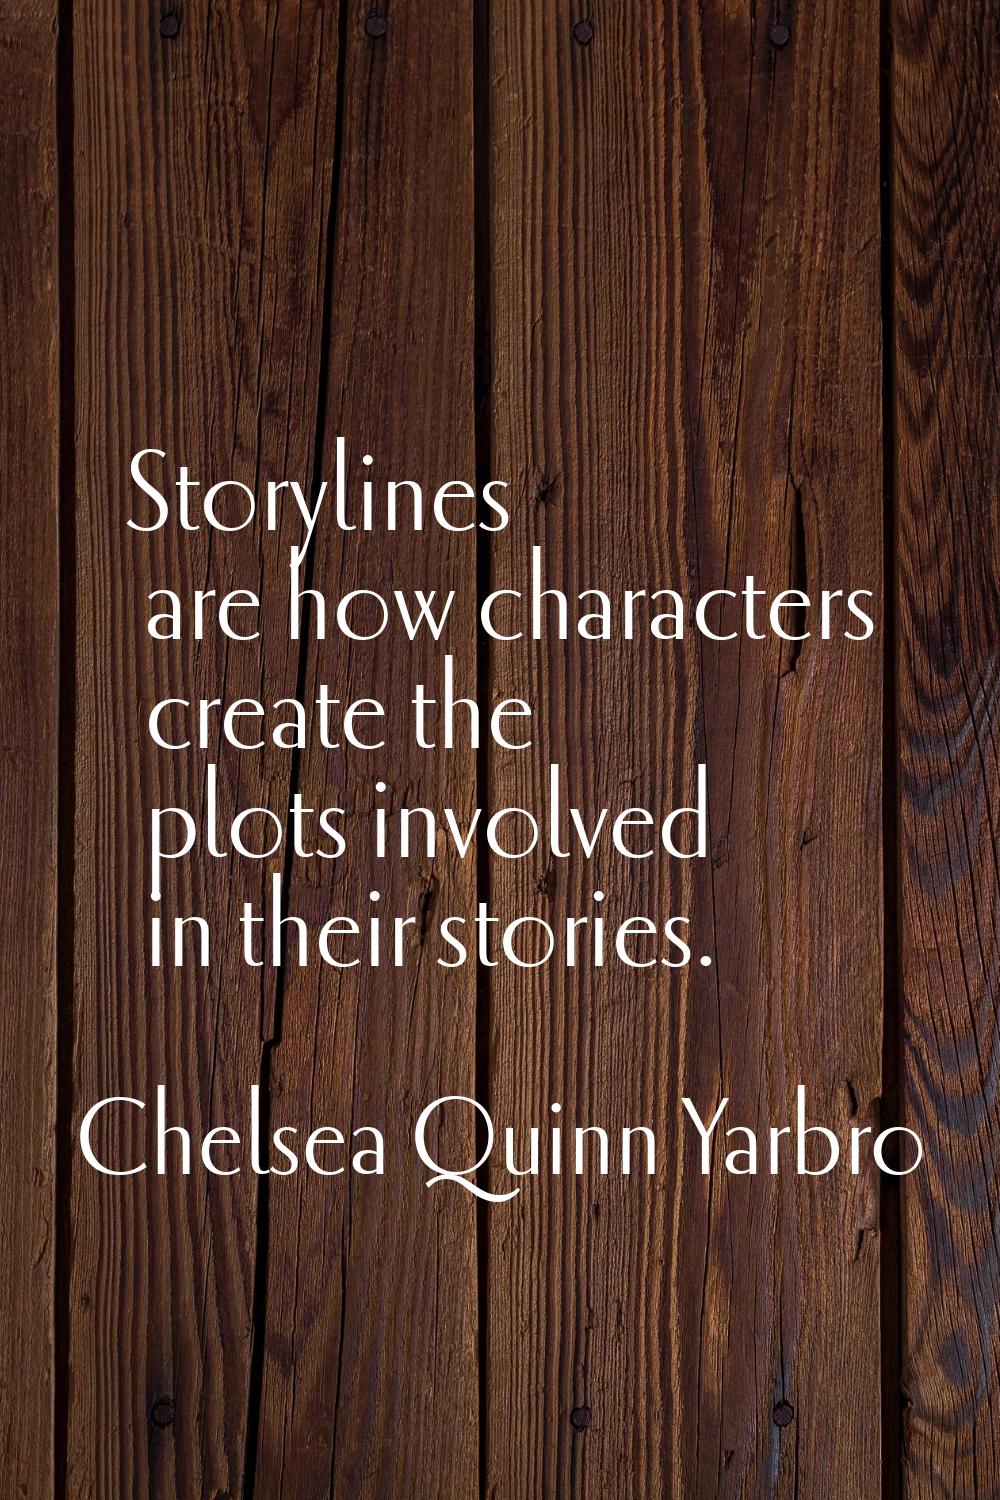 Storylines are how characters create the plots involved in their stories.